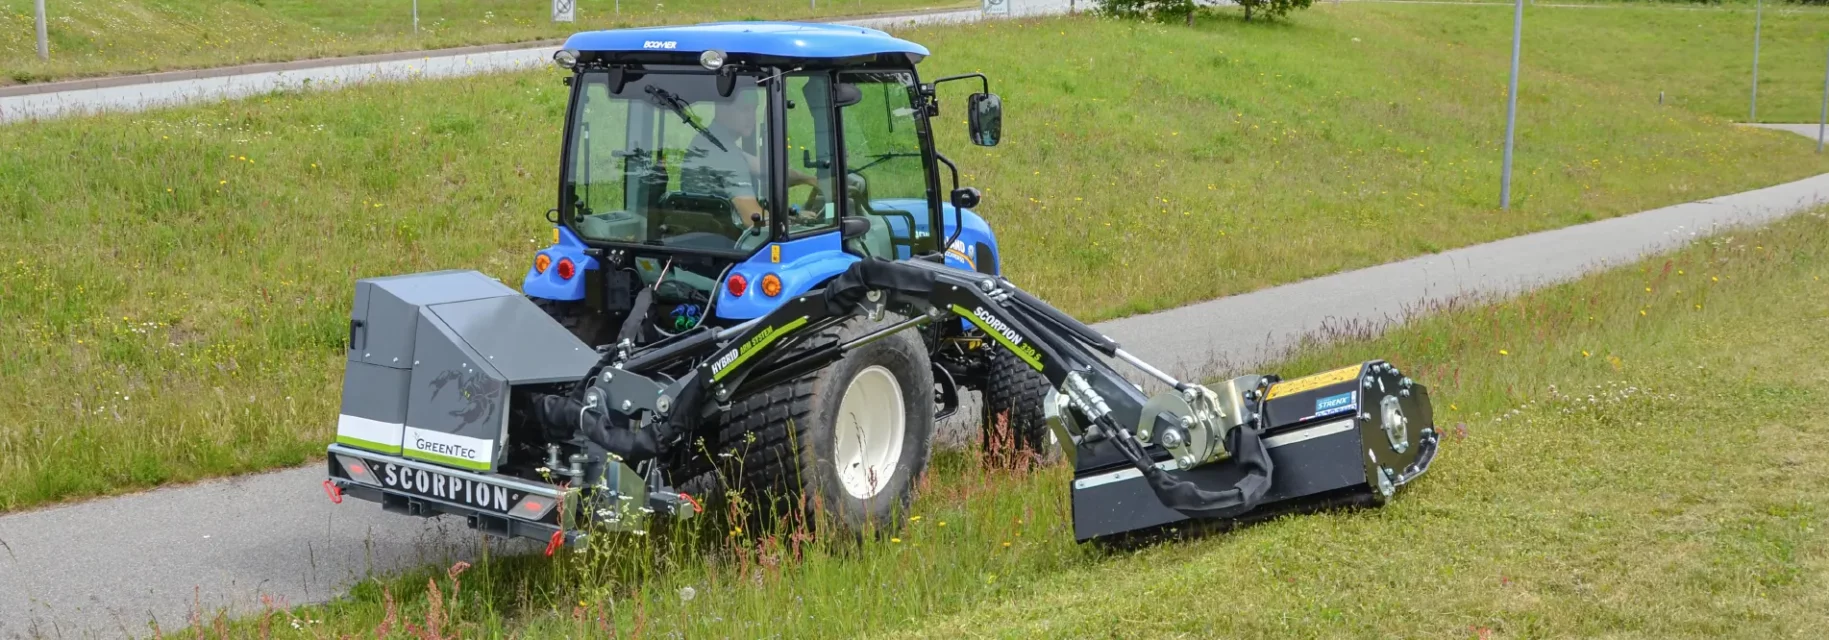 Hydraulic boom mower for compact tractor